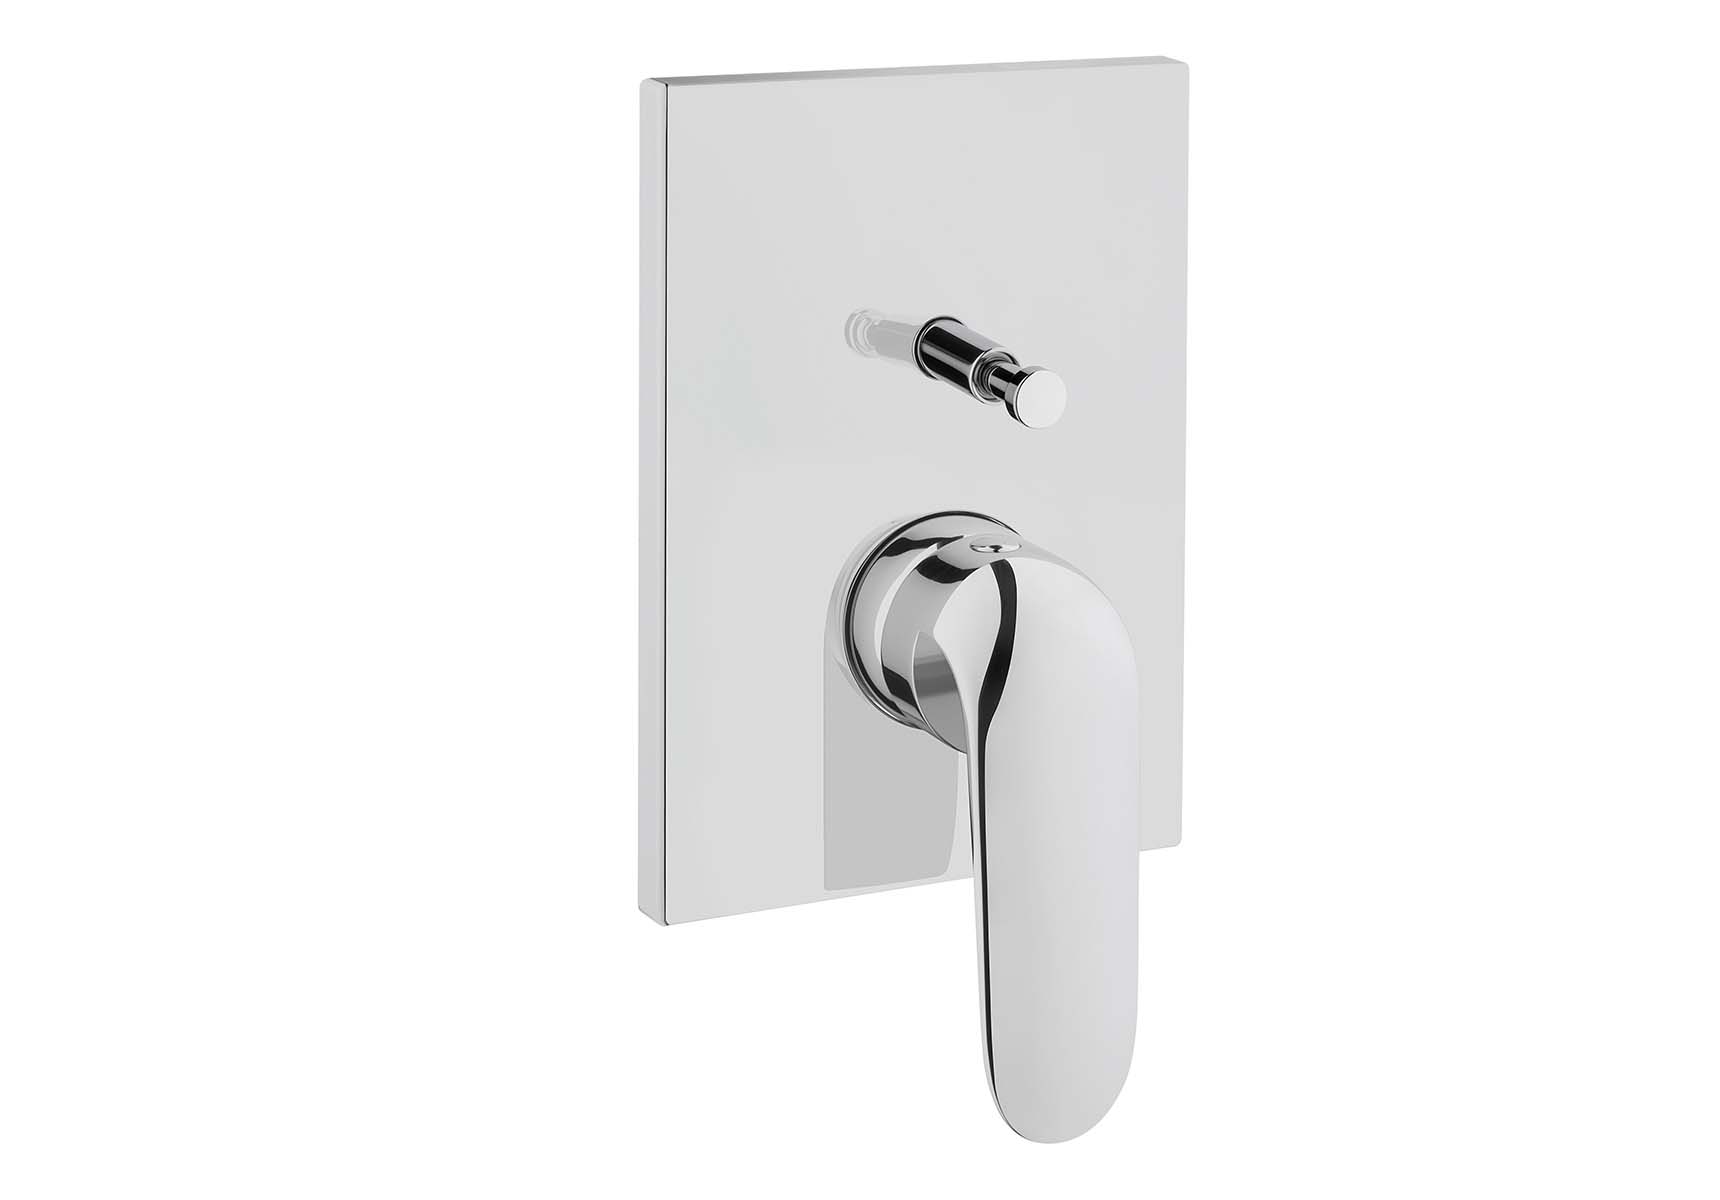 Style X Built-In Bath/Shower Mixer (Exposed Part)